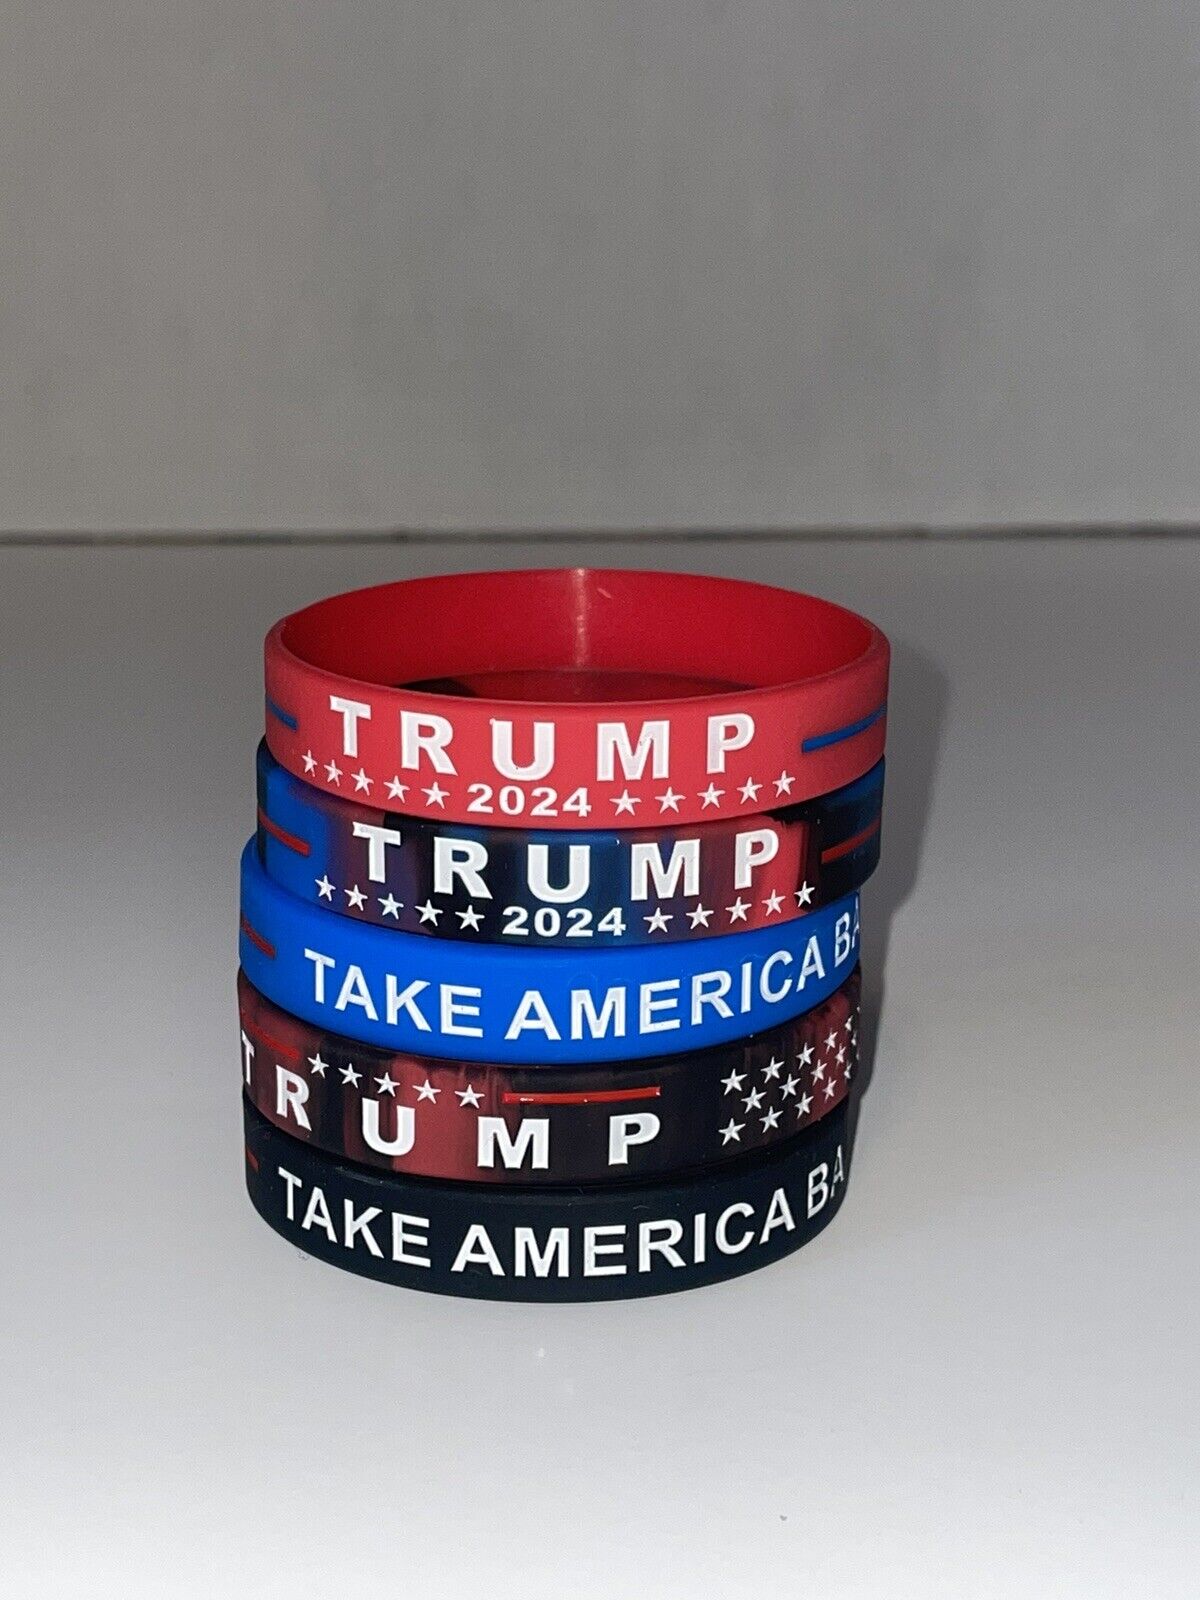 Donald Trump 2024 Bracelet/Wristband MAGA Variety Pack (Each Order Includes 5)